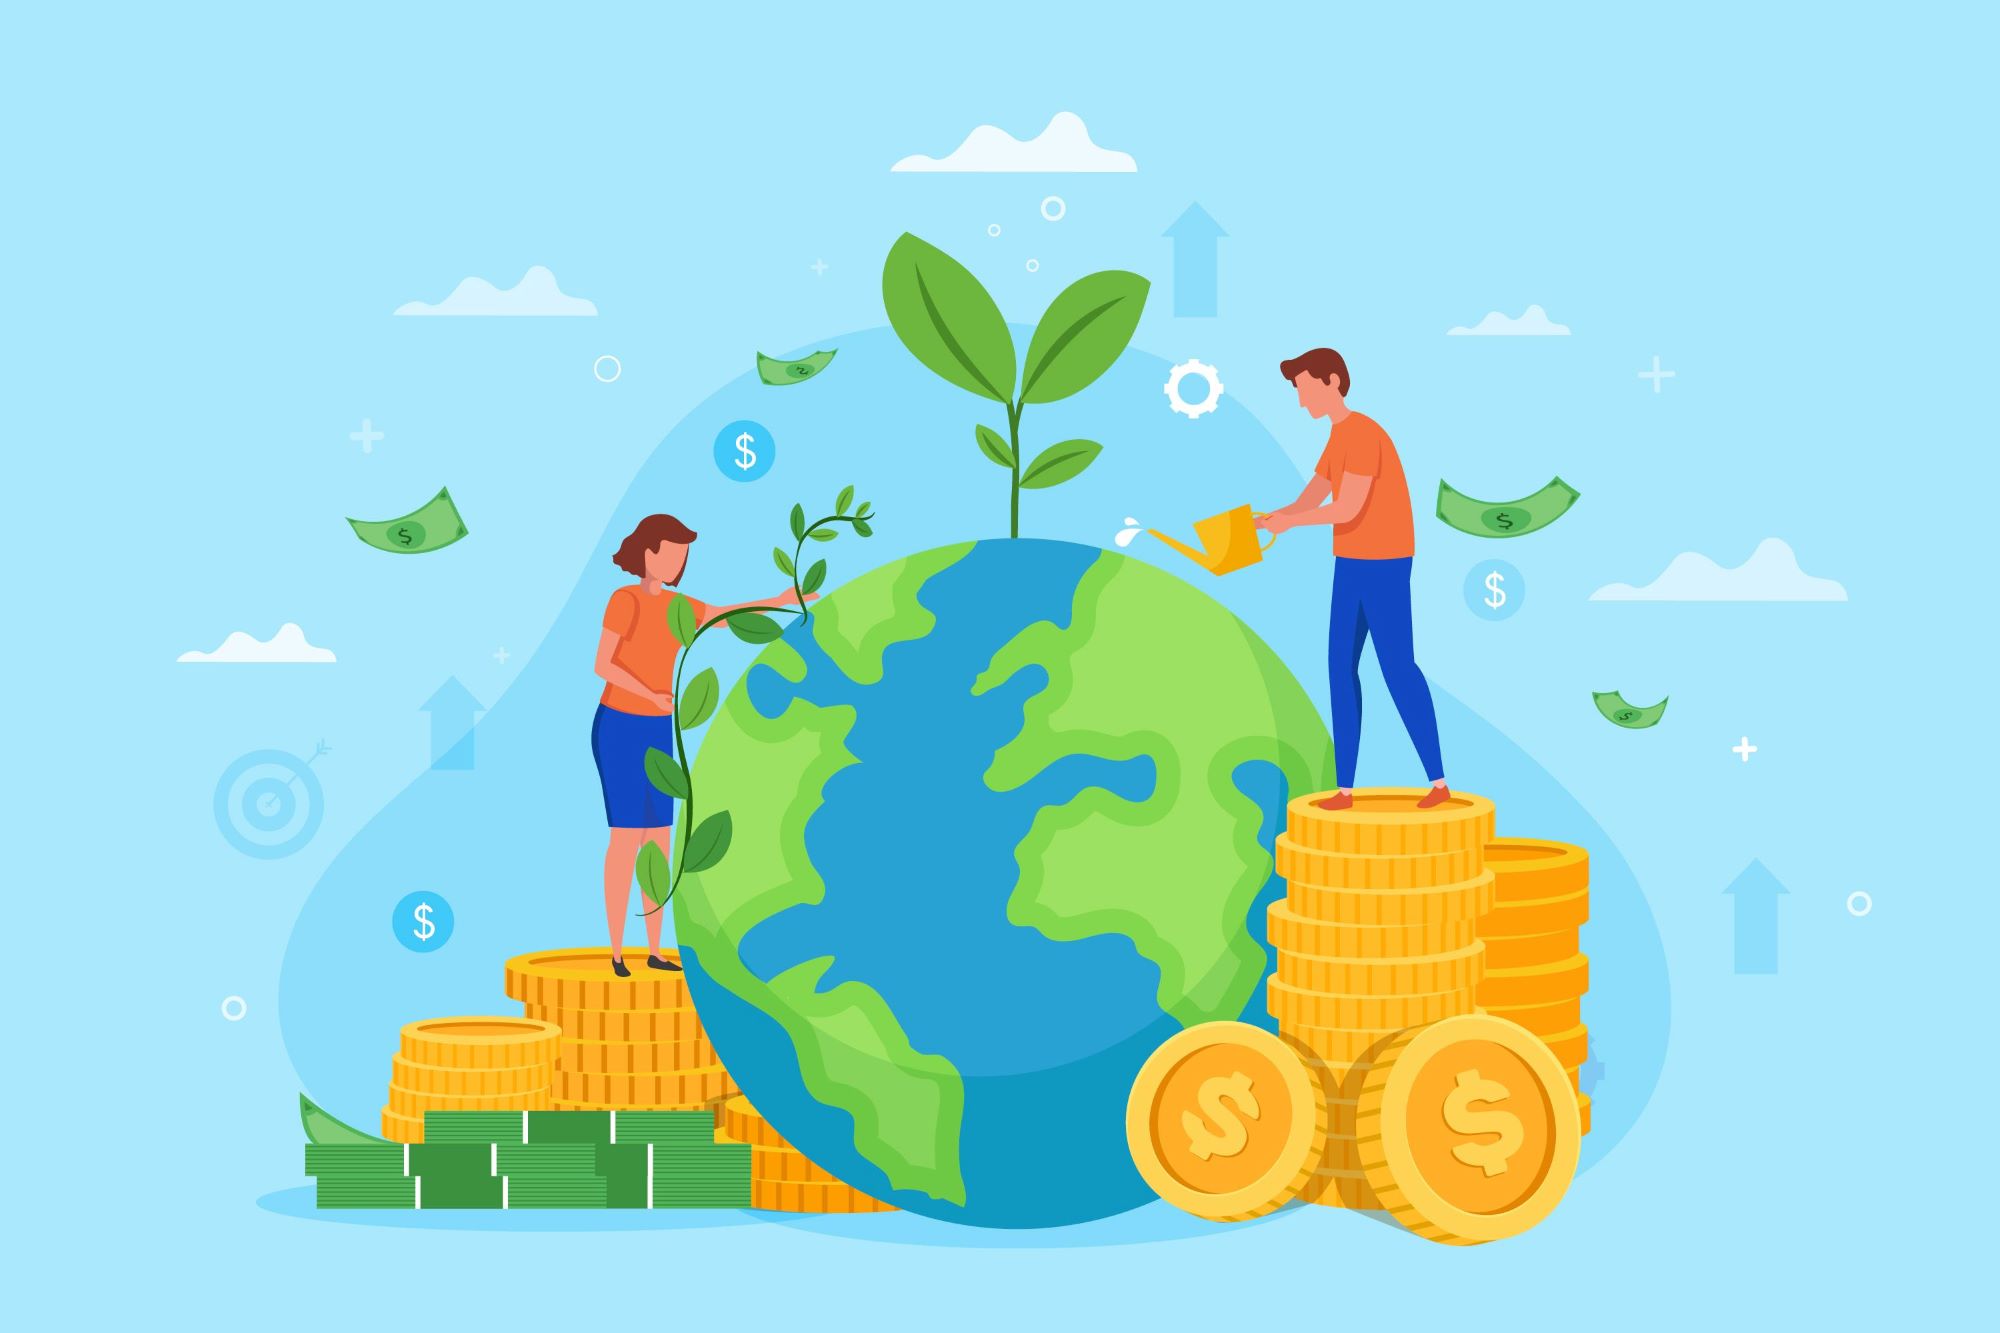 Sustainable Investing: Financial Decisions for a Better World